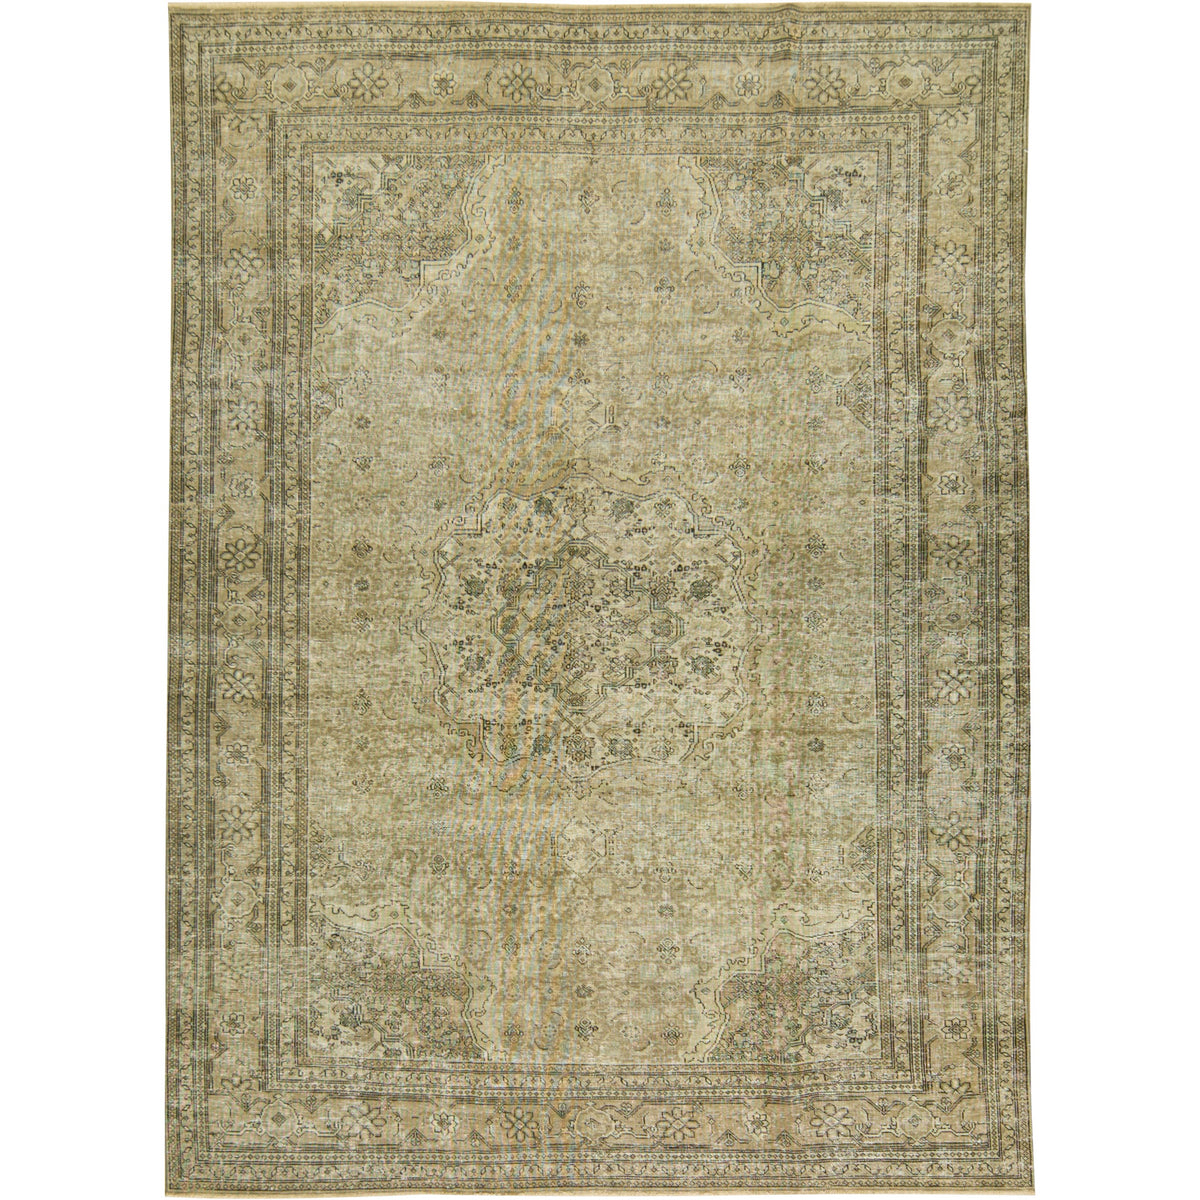 Handwoven tradition meets modern style: The Fiorella Rug | Kuden Rugs